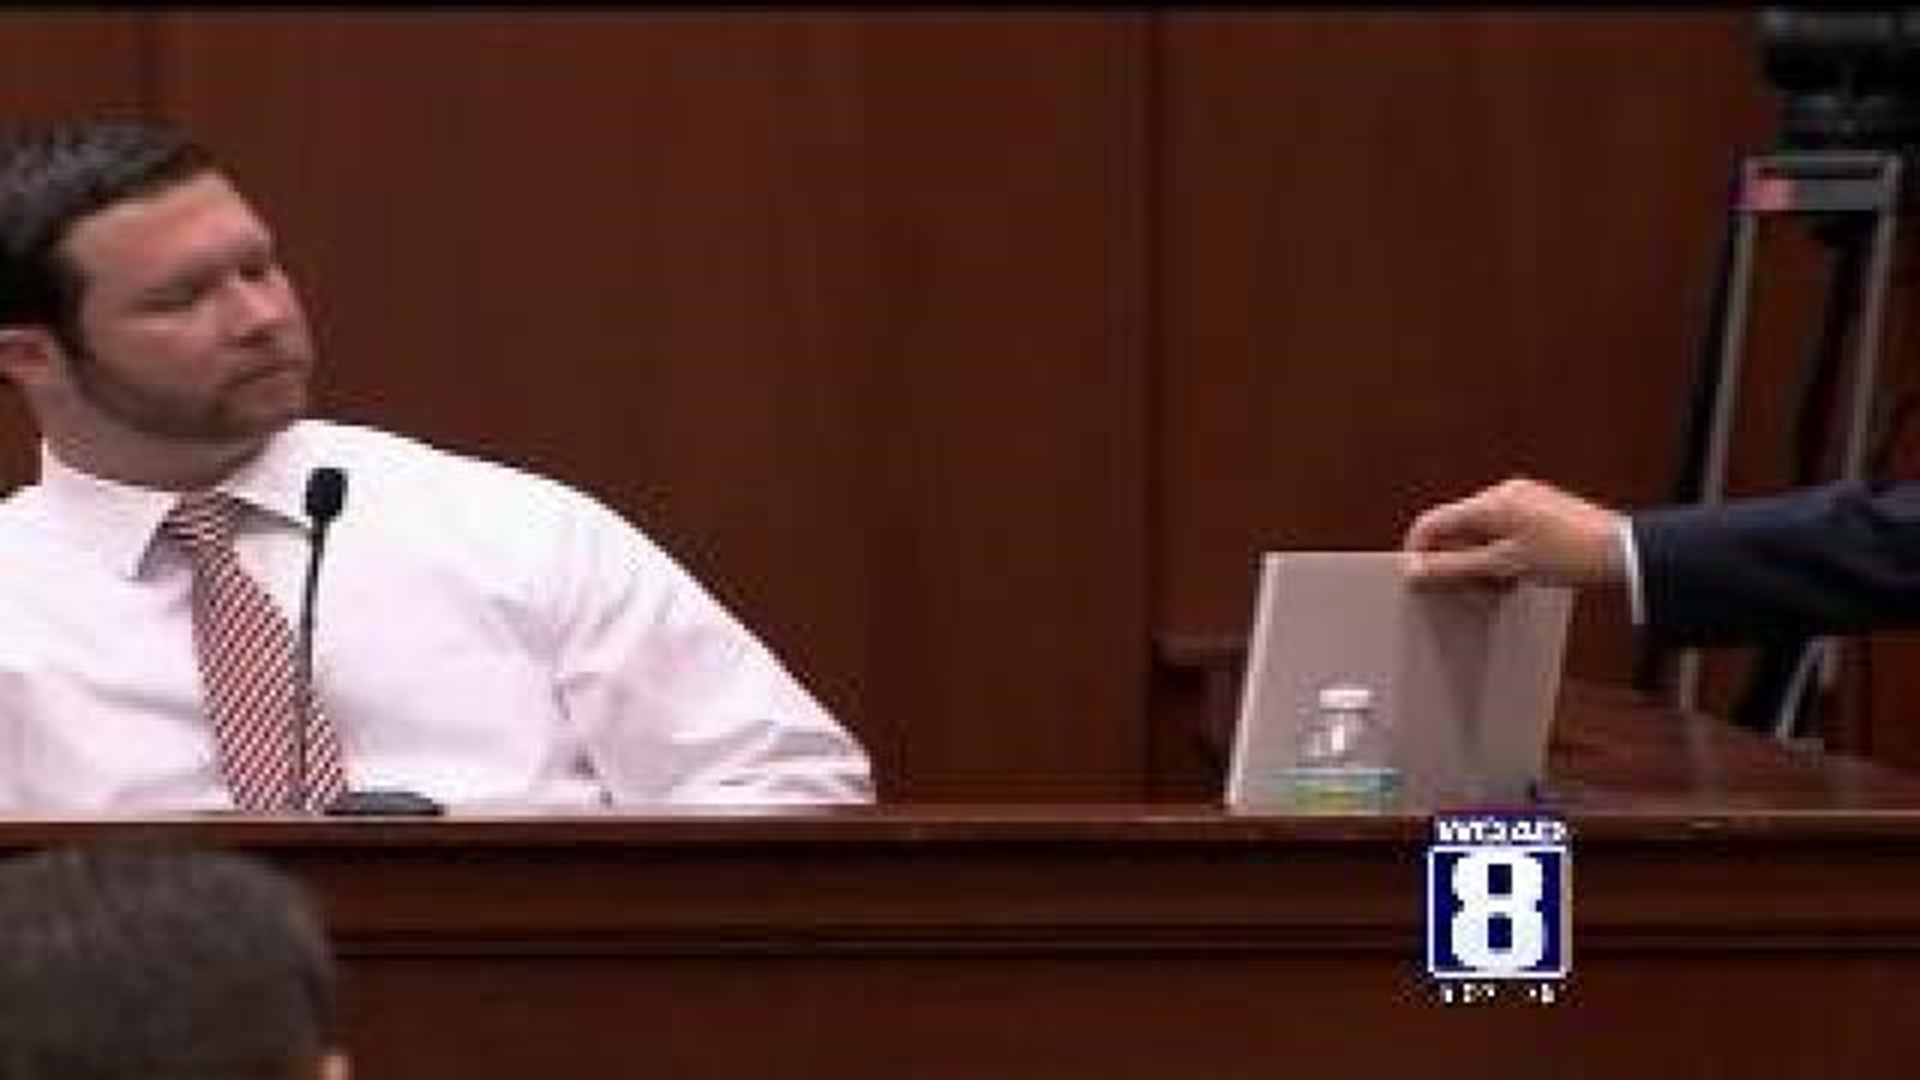 Witnesses take the stand in Zimmerman trial